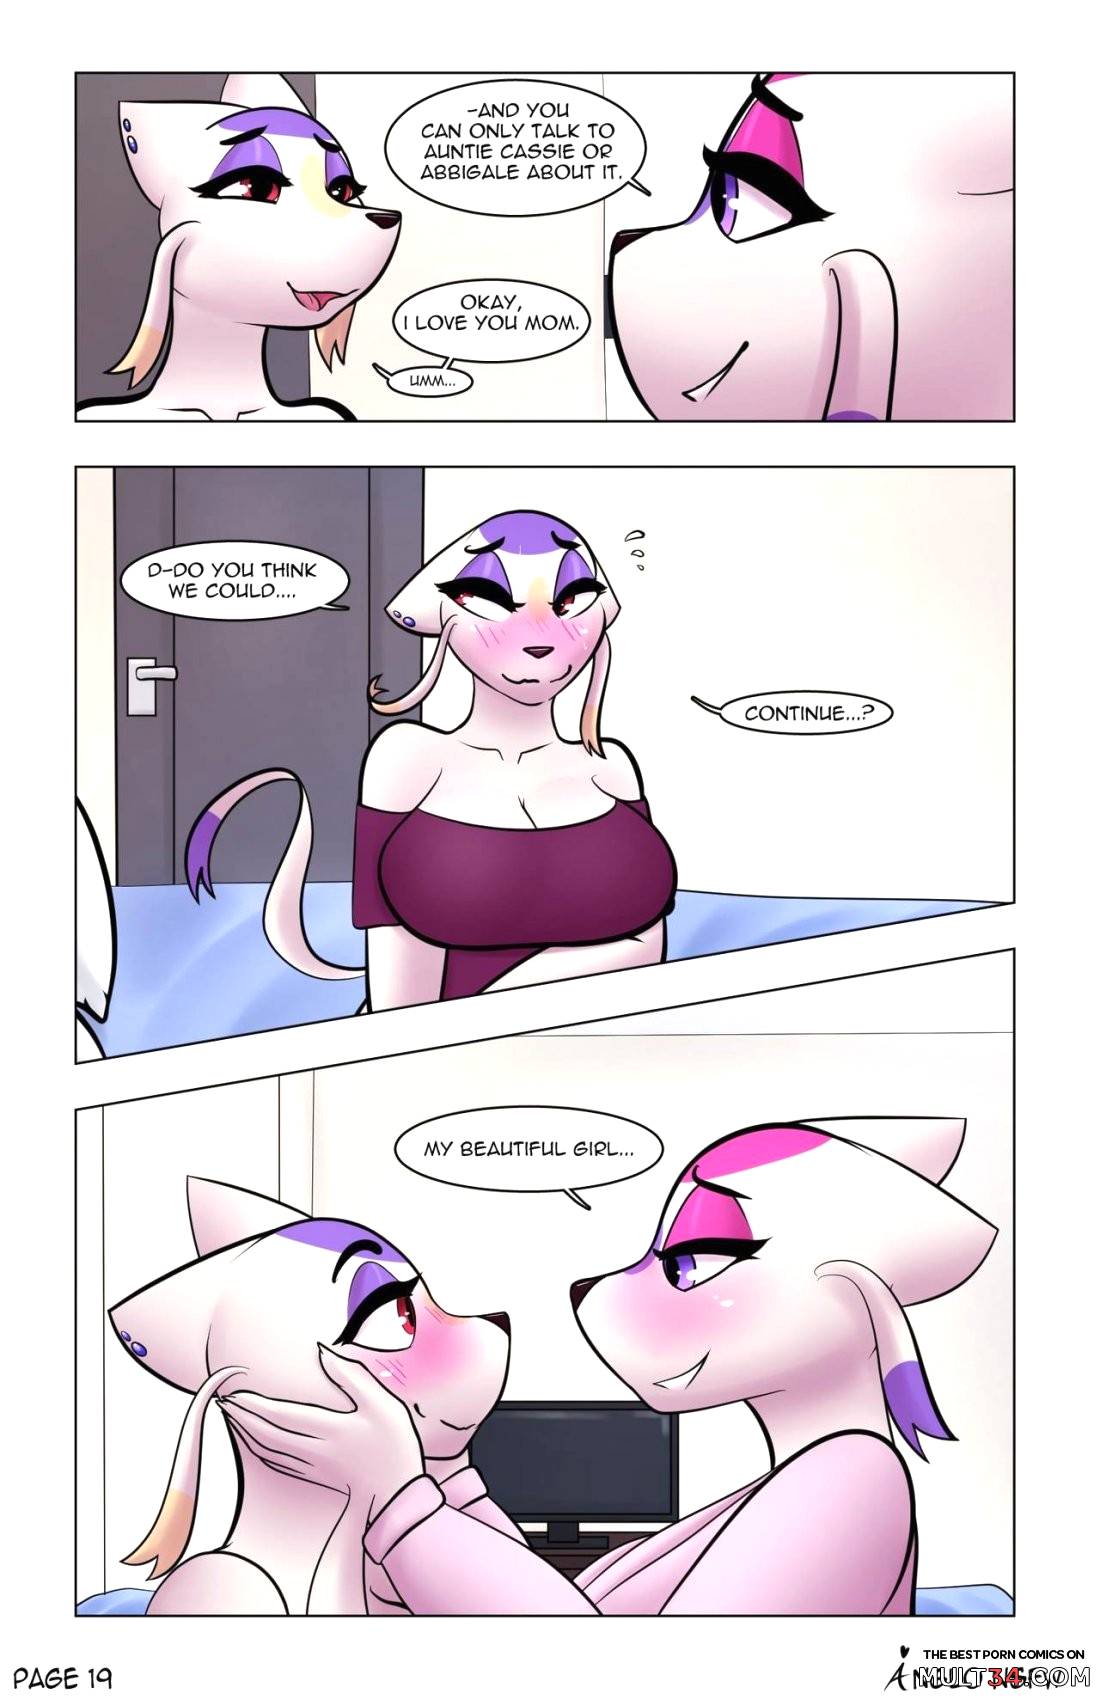 Dating Advice page 19